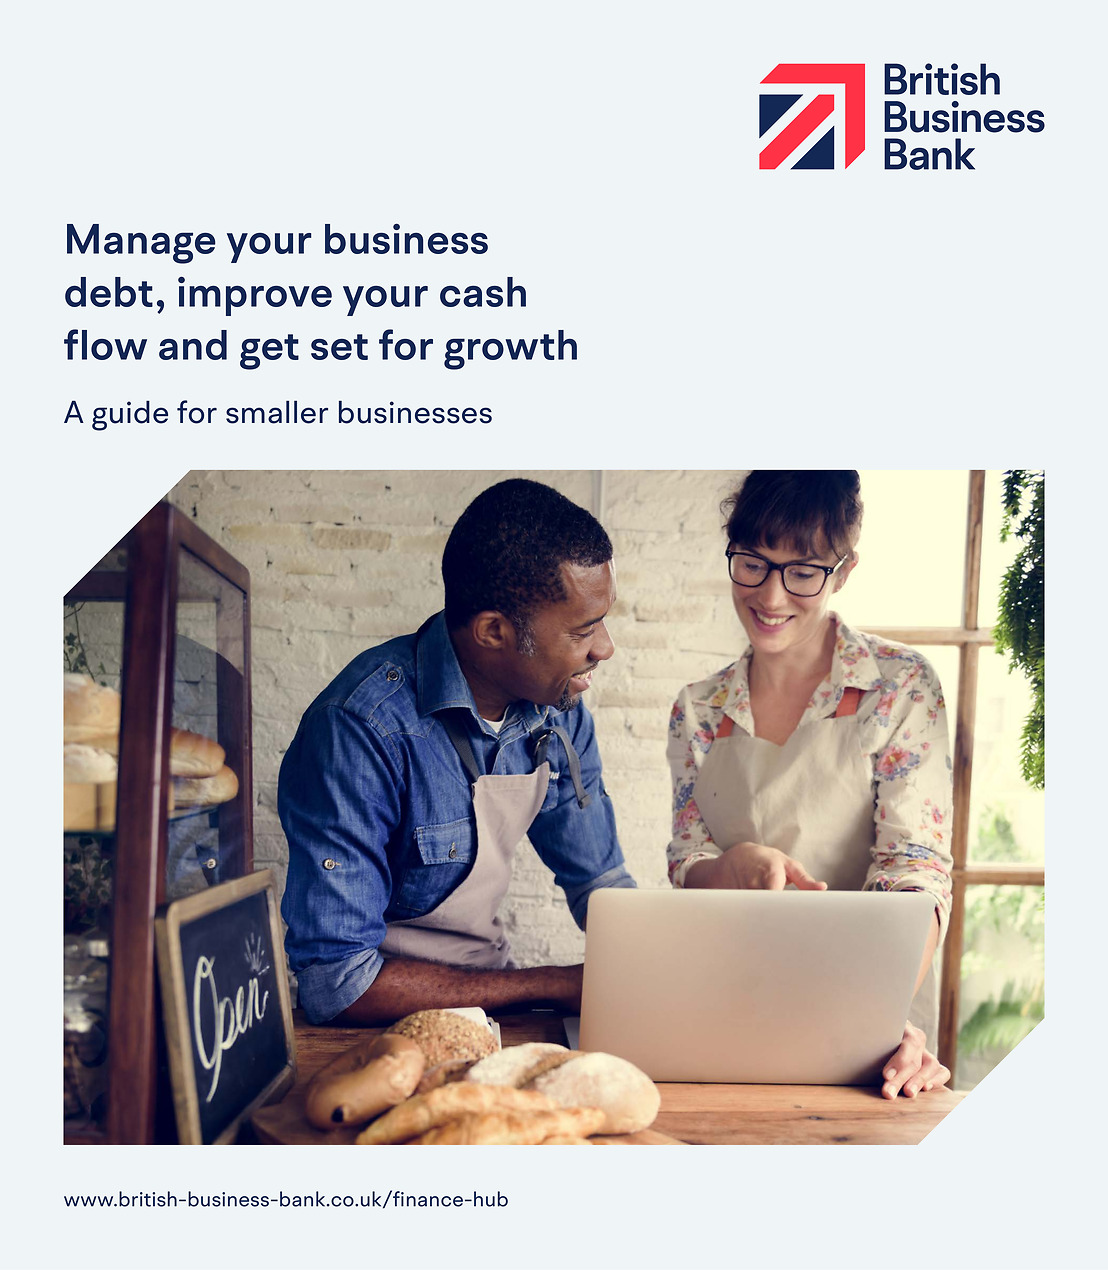 Brochure cover. Title: Manage your business debt, improve your cash flow and get set for growth. A guide for smaller businesses. From the British Business Bank.